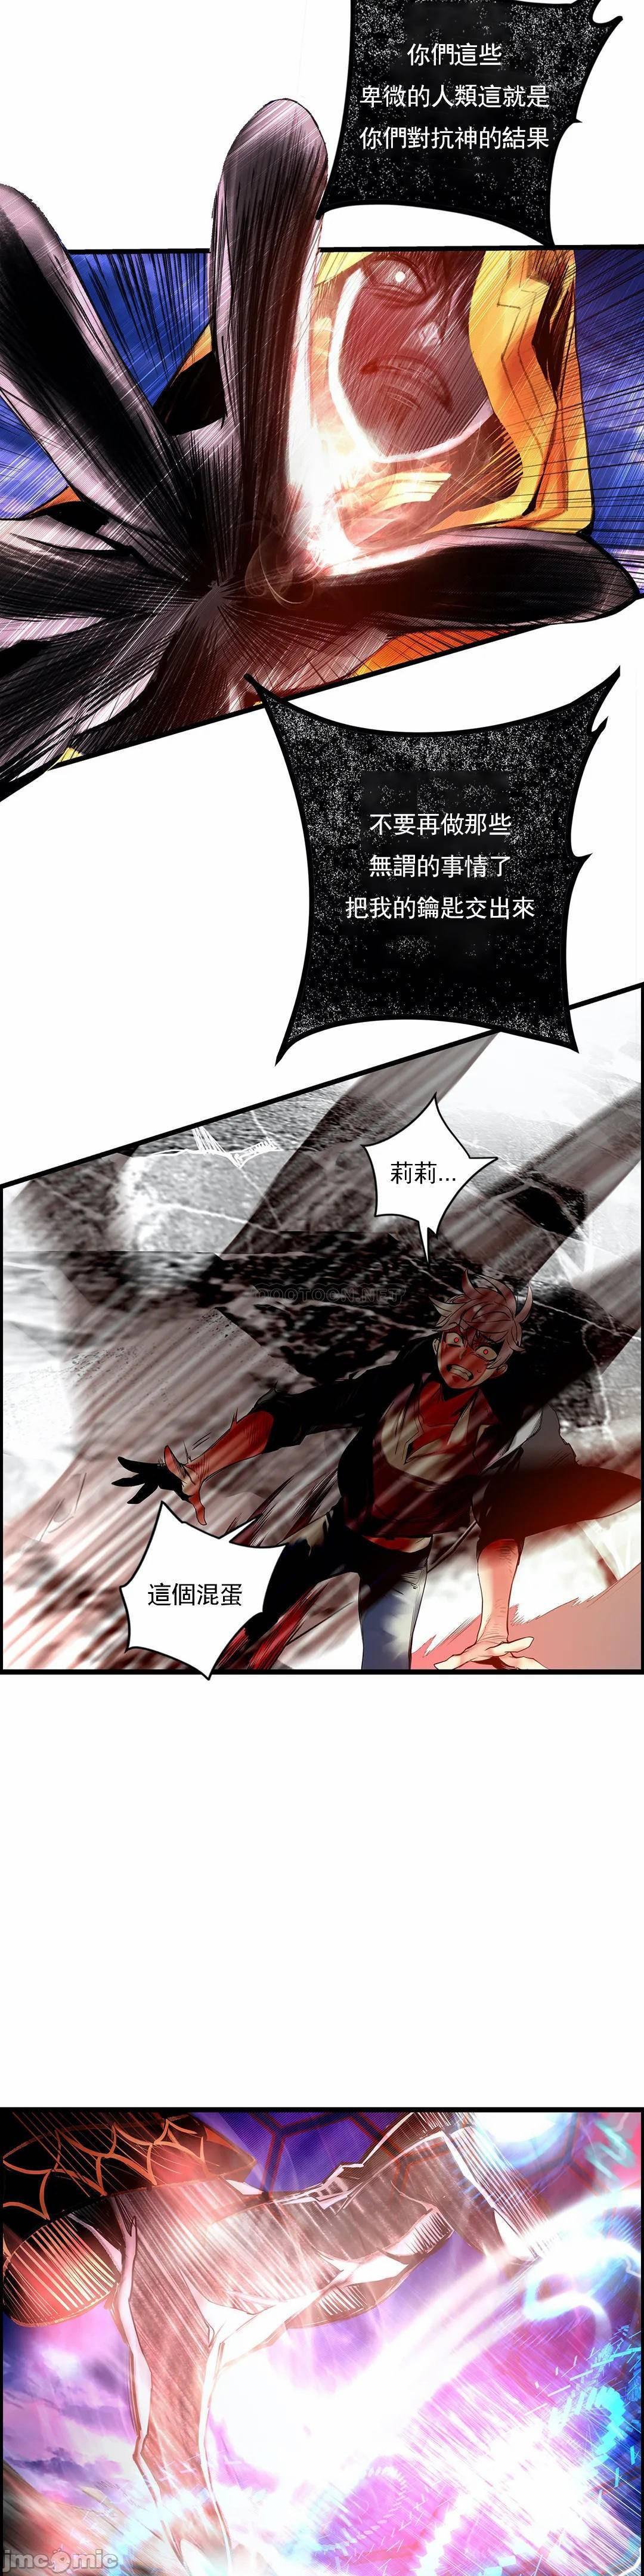 [Juder] Lilith`s Cord (第二季) Ch.77-93 end [Chinese] 456